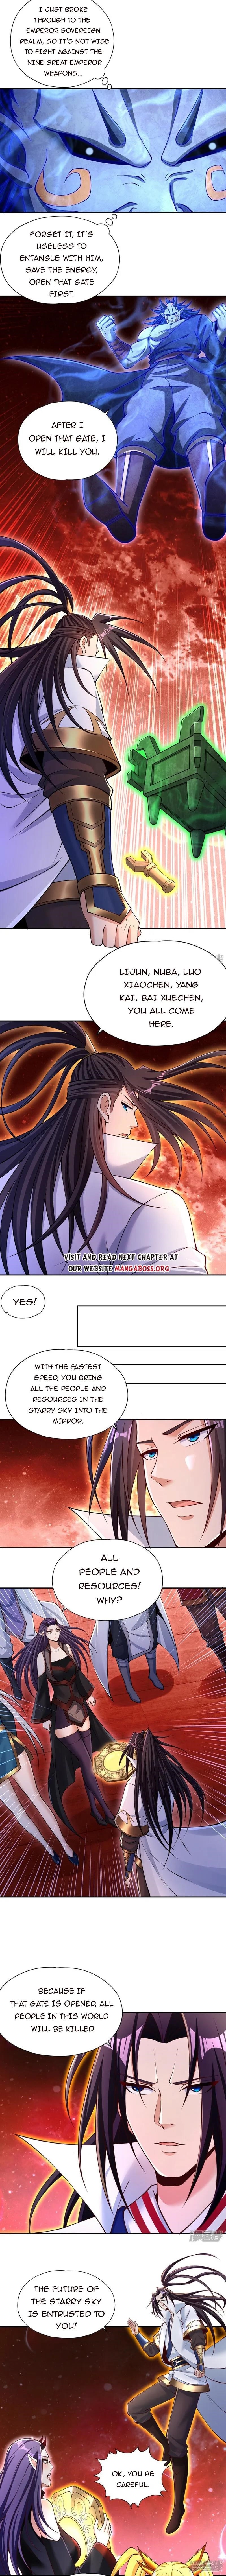 The Time of Rebirth Chapter 281 - Page 5